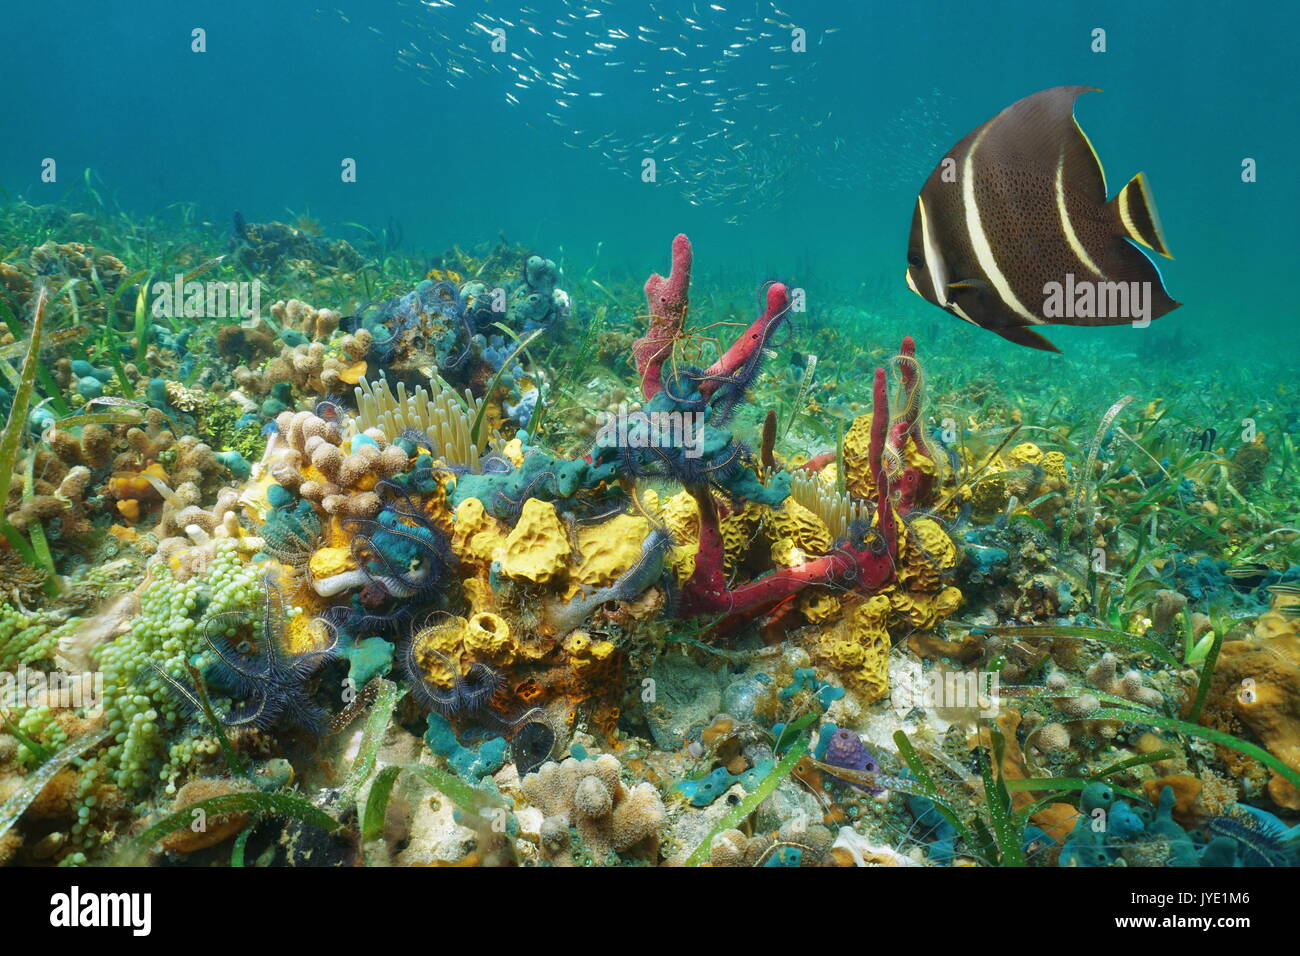 Colorful underwater marine life on the seabed in the Caribbean sea composed by corals, sponges, brittle stars, anemones with an angelfish Stock Photo